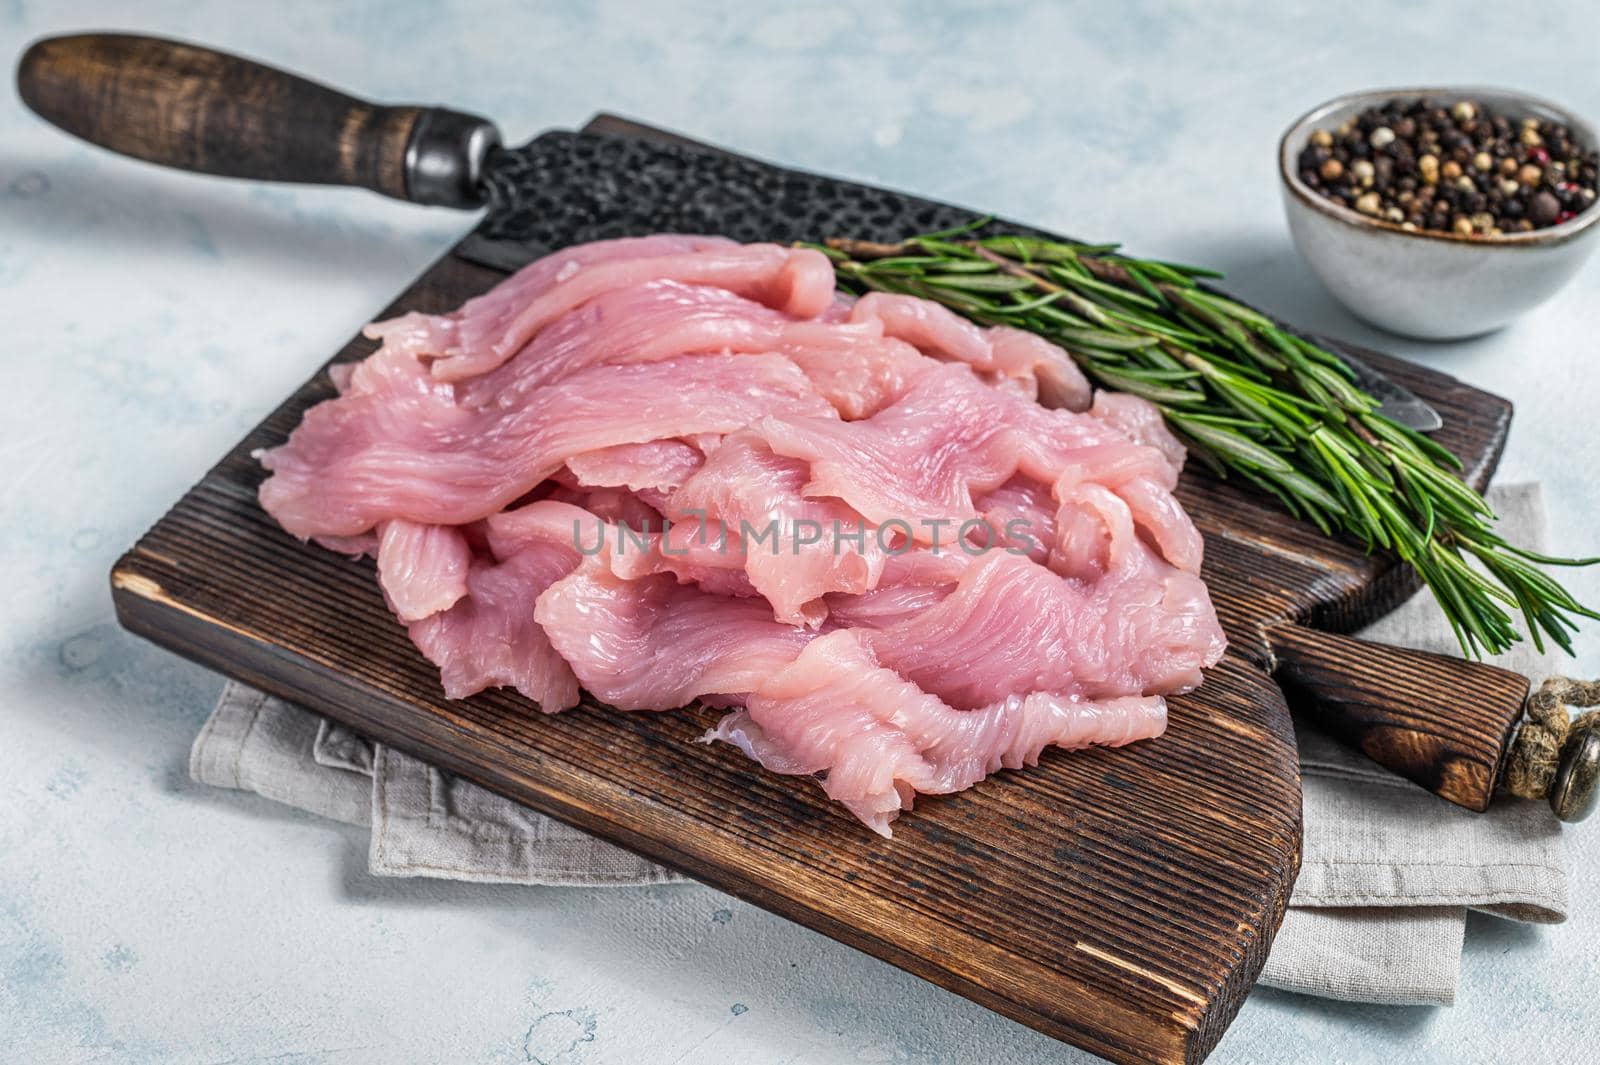 Sliced Raw turkey or chicken fillet meat on a cutting board with butcher knife. White background. Top View.